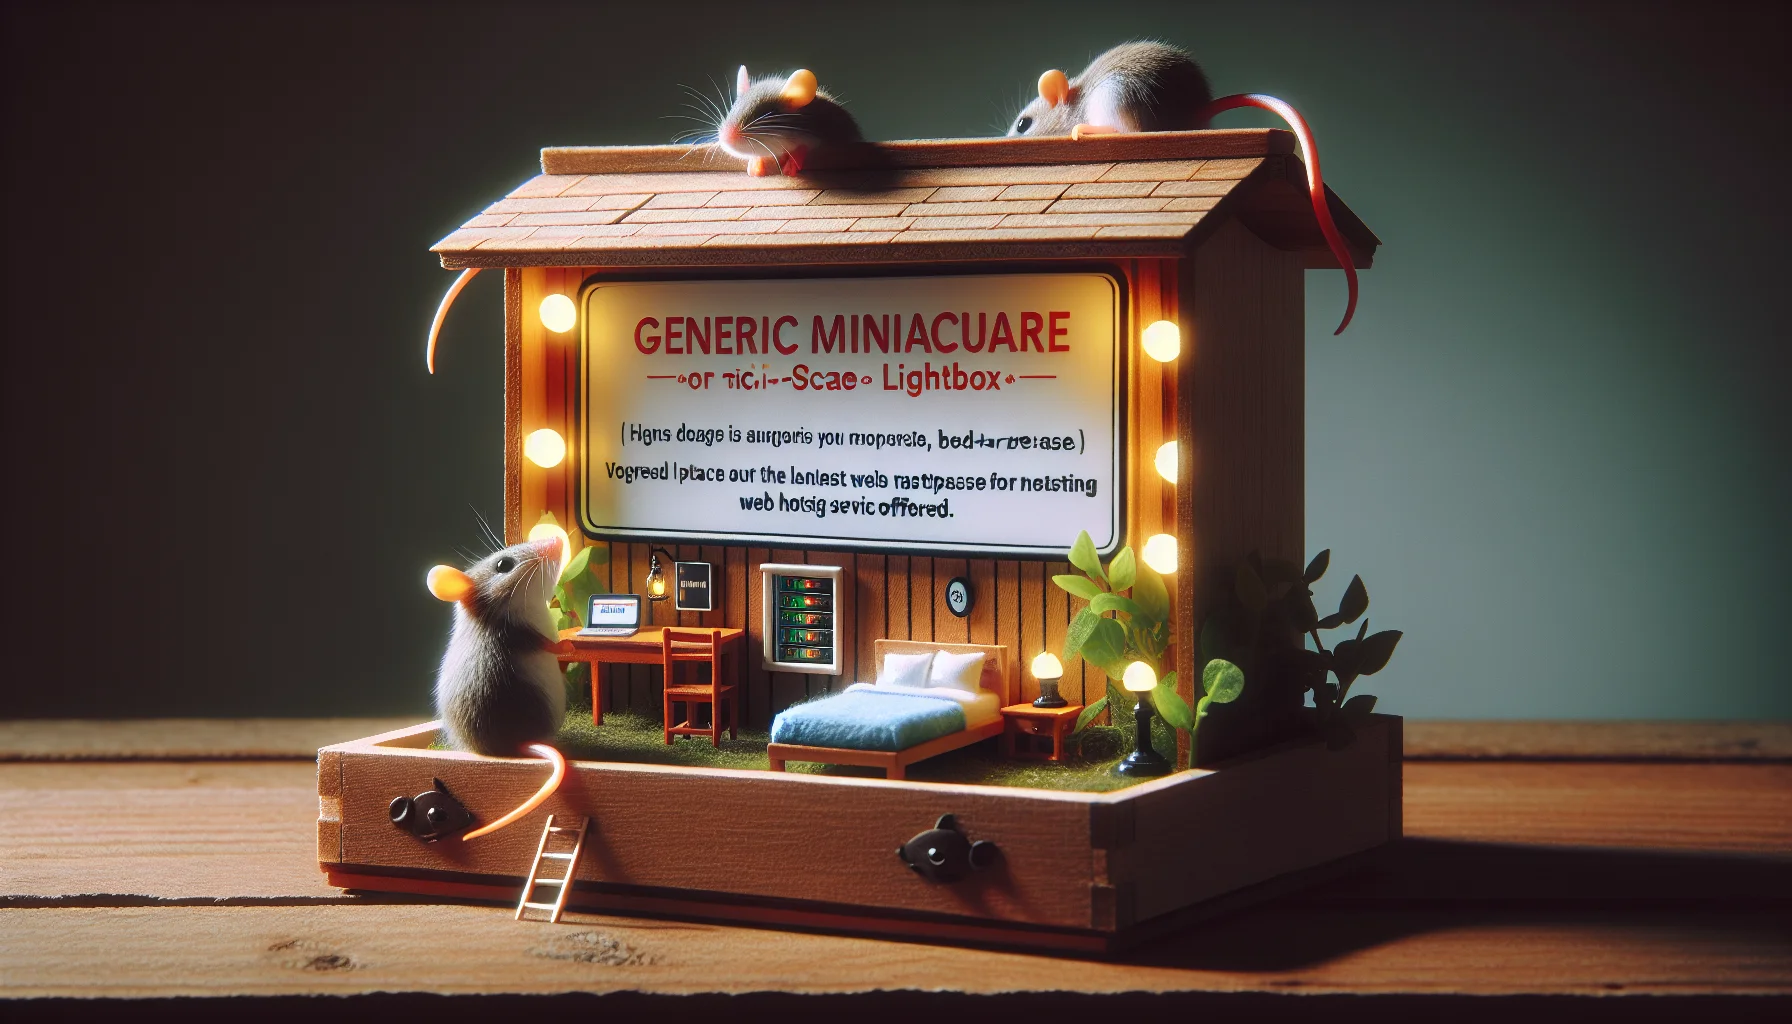 Create an amusing image showcasing a generic miniature lightbox in a whimsical scenario. The lightbox has been repurposed as an alluring bed-and-breakfast for tech-savvy mice who are portrayed as customers. The mice are keen on exploring the latest tiny-scale web hosting service offered. There is a company logo, fictional and not associated with any real organization, on the lightbox that hints it is a unique place for web hosting.